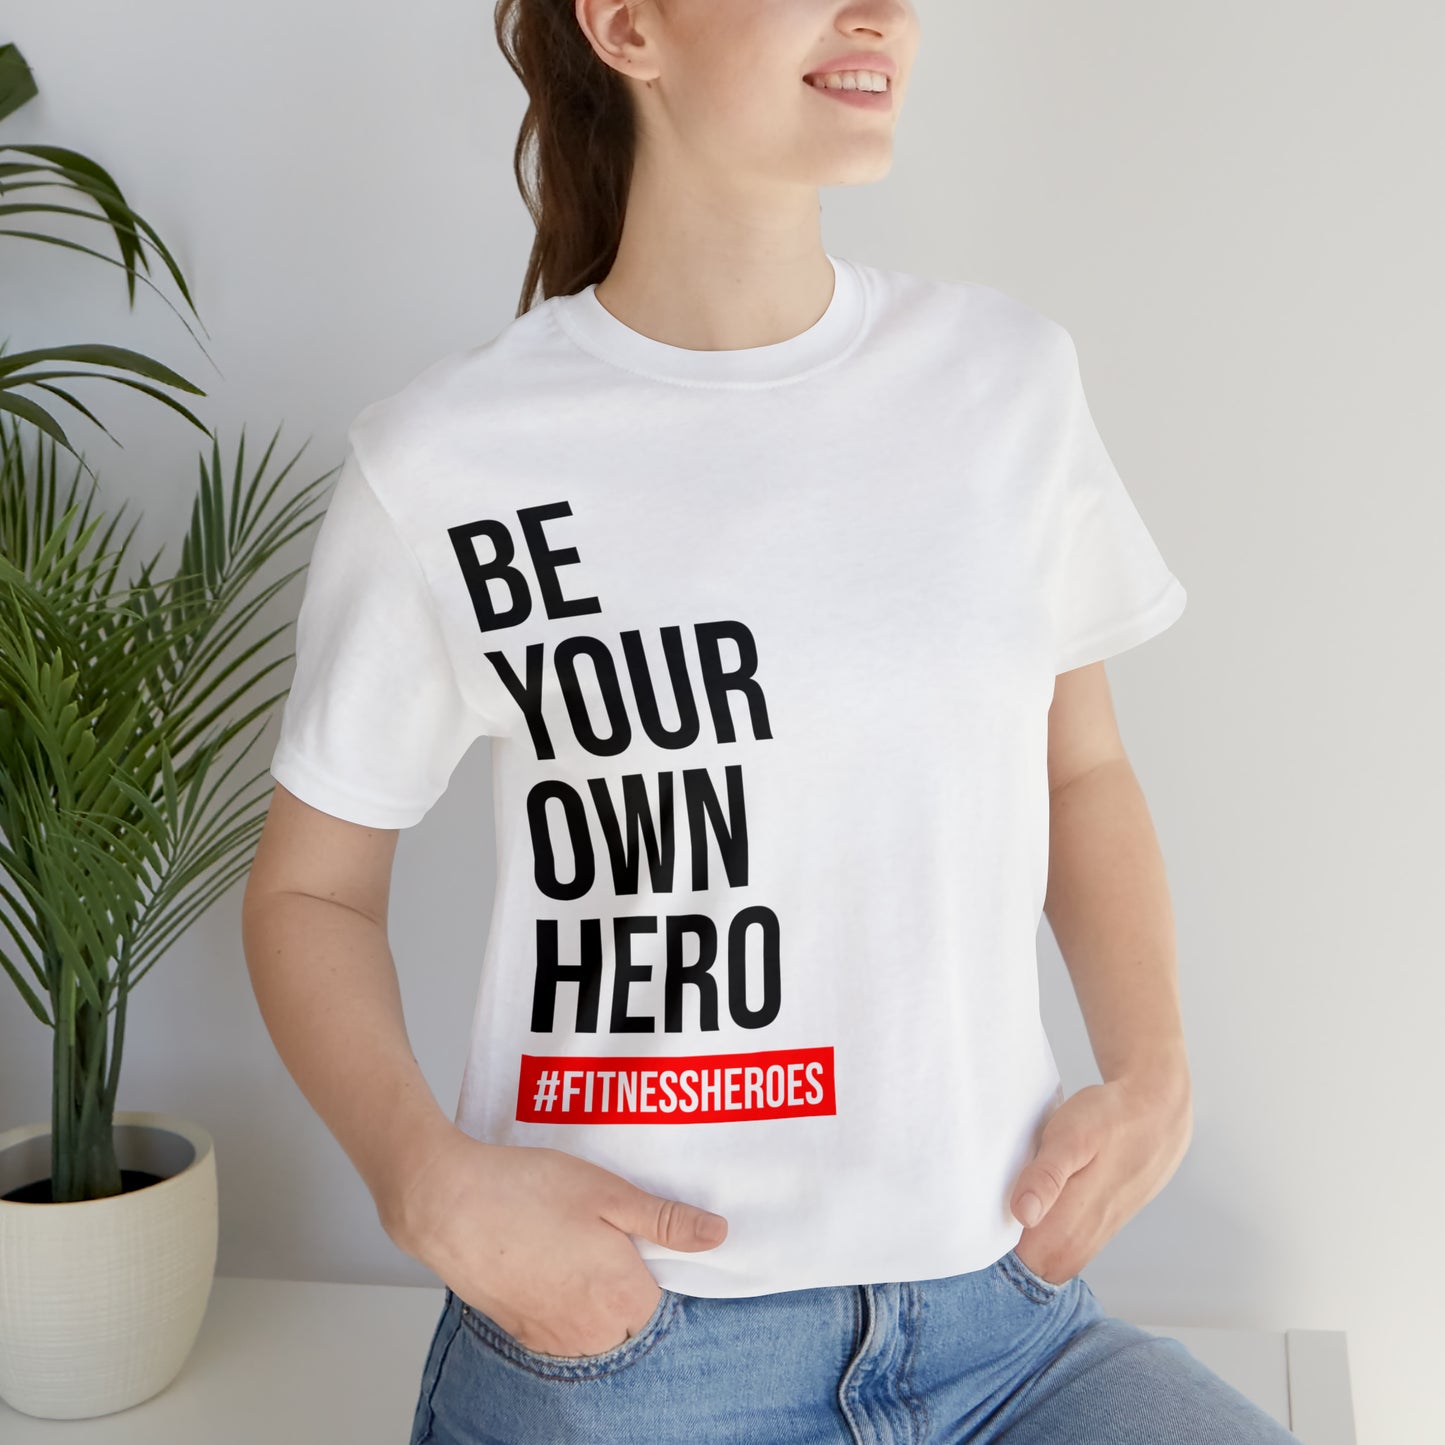 BE YOUR OWN HERO